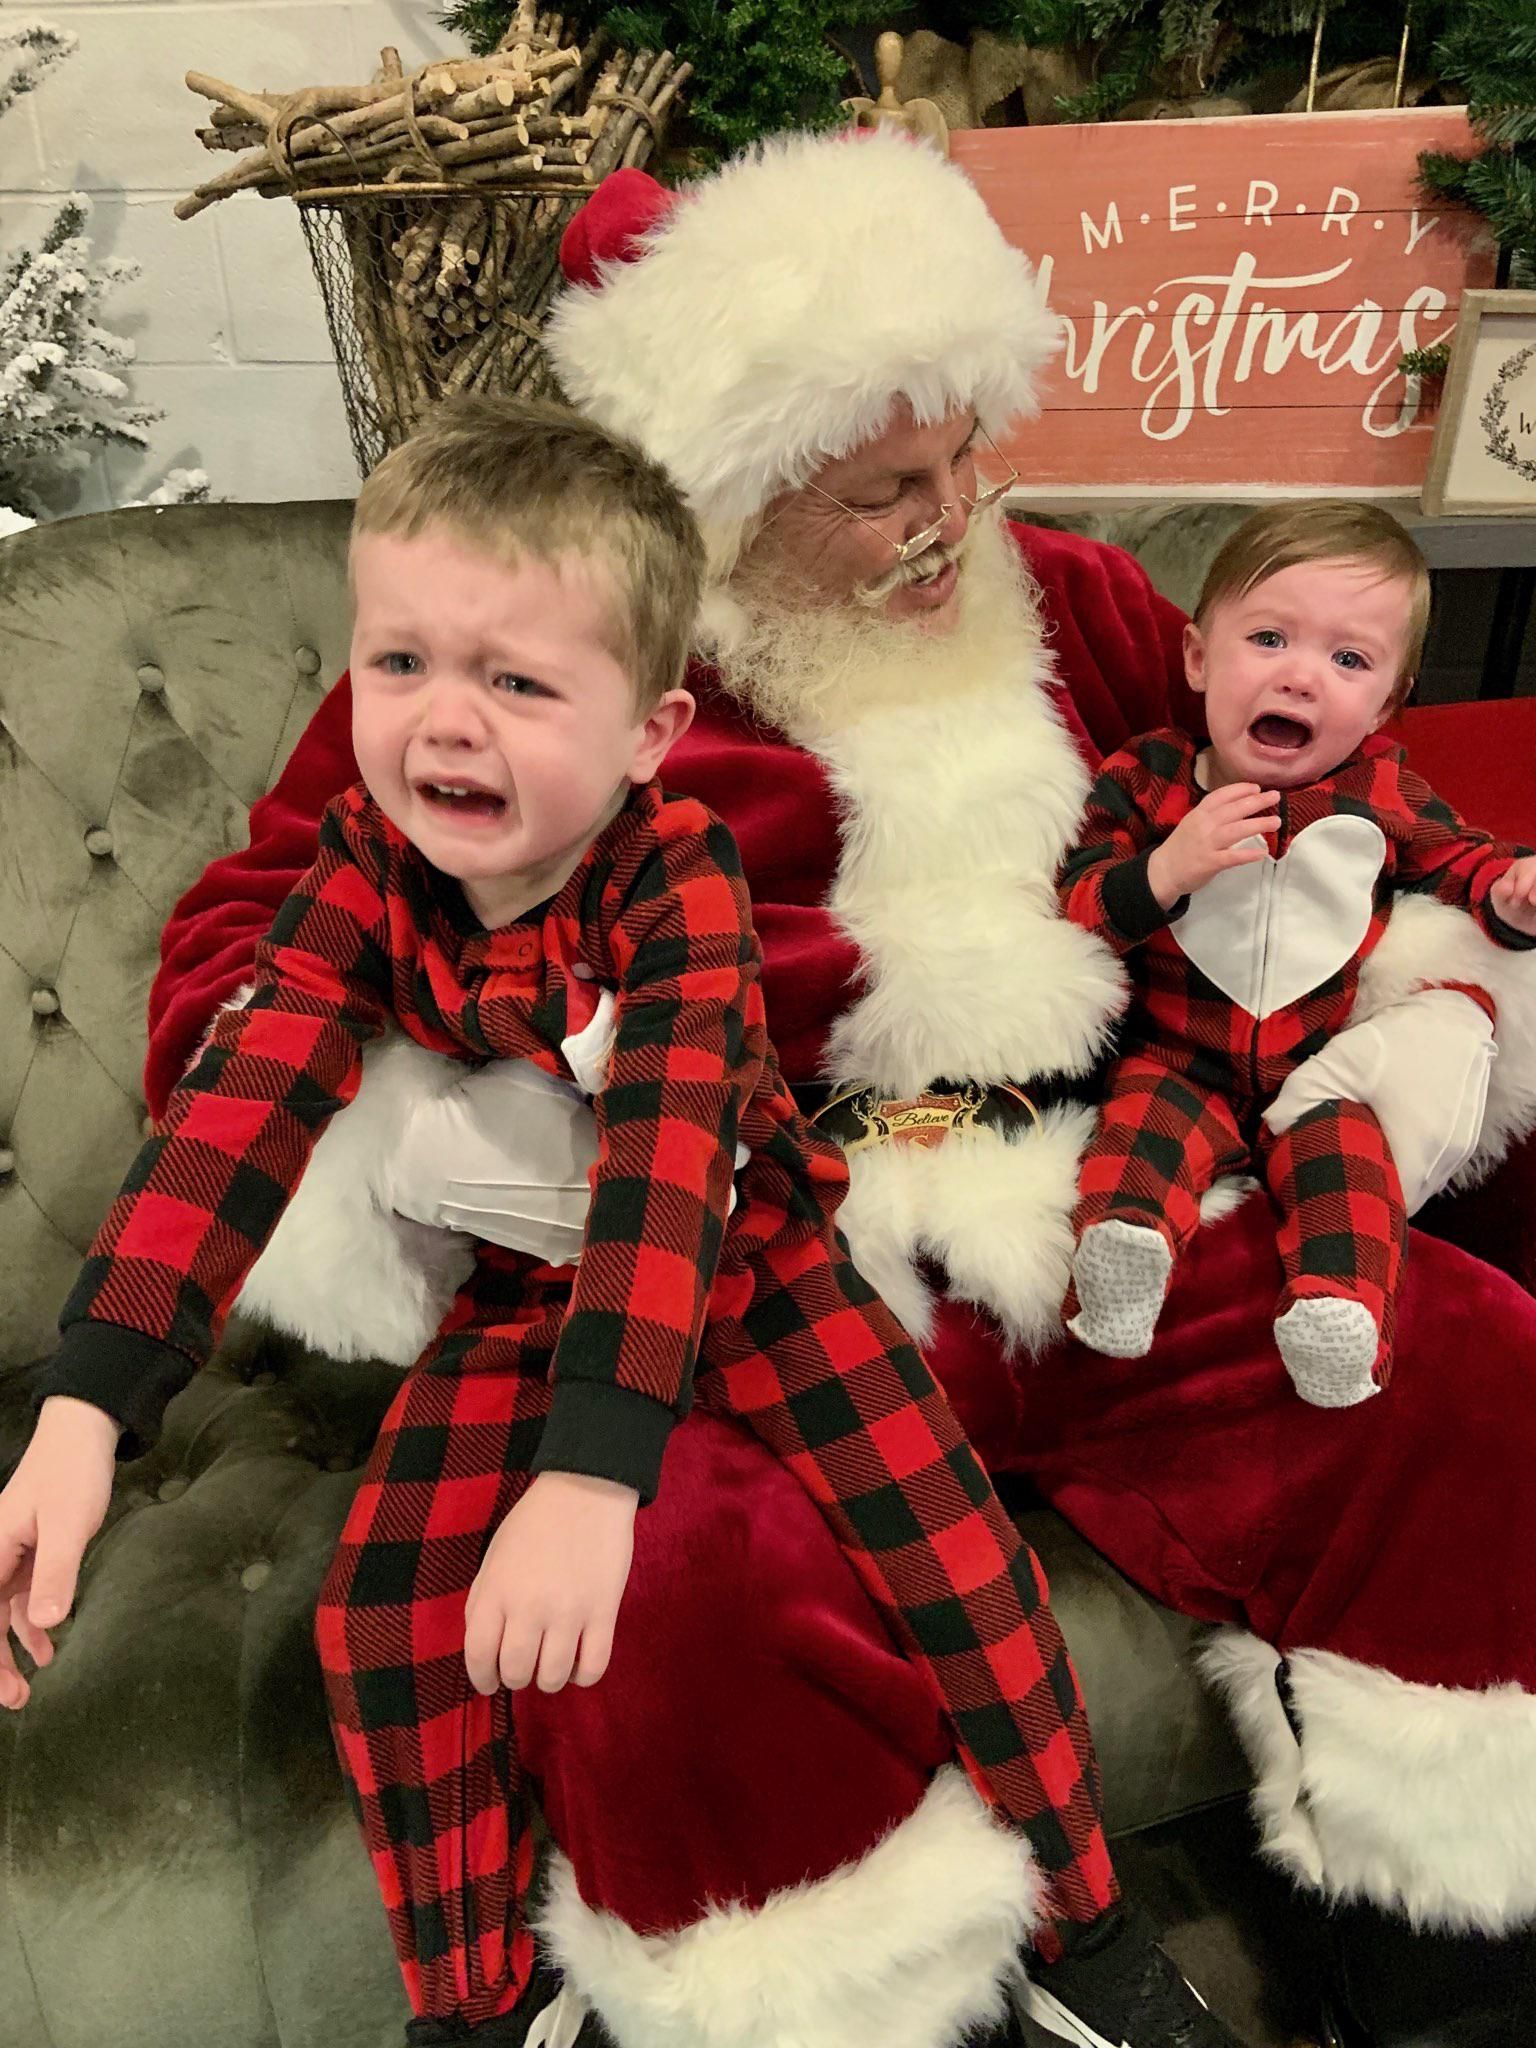 They’re getting nightmares for Christmas